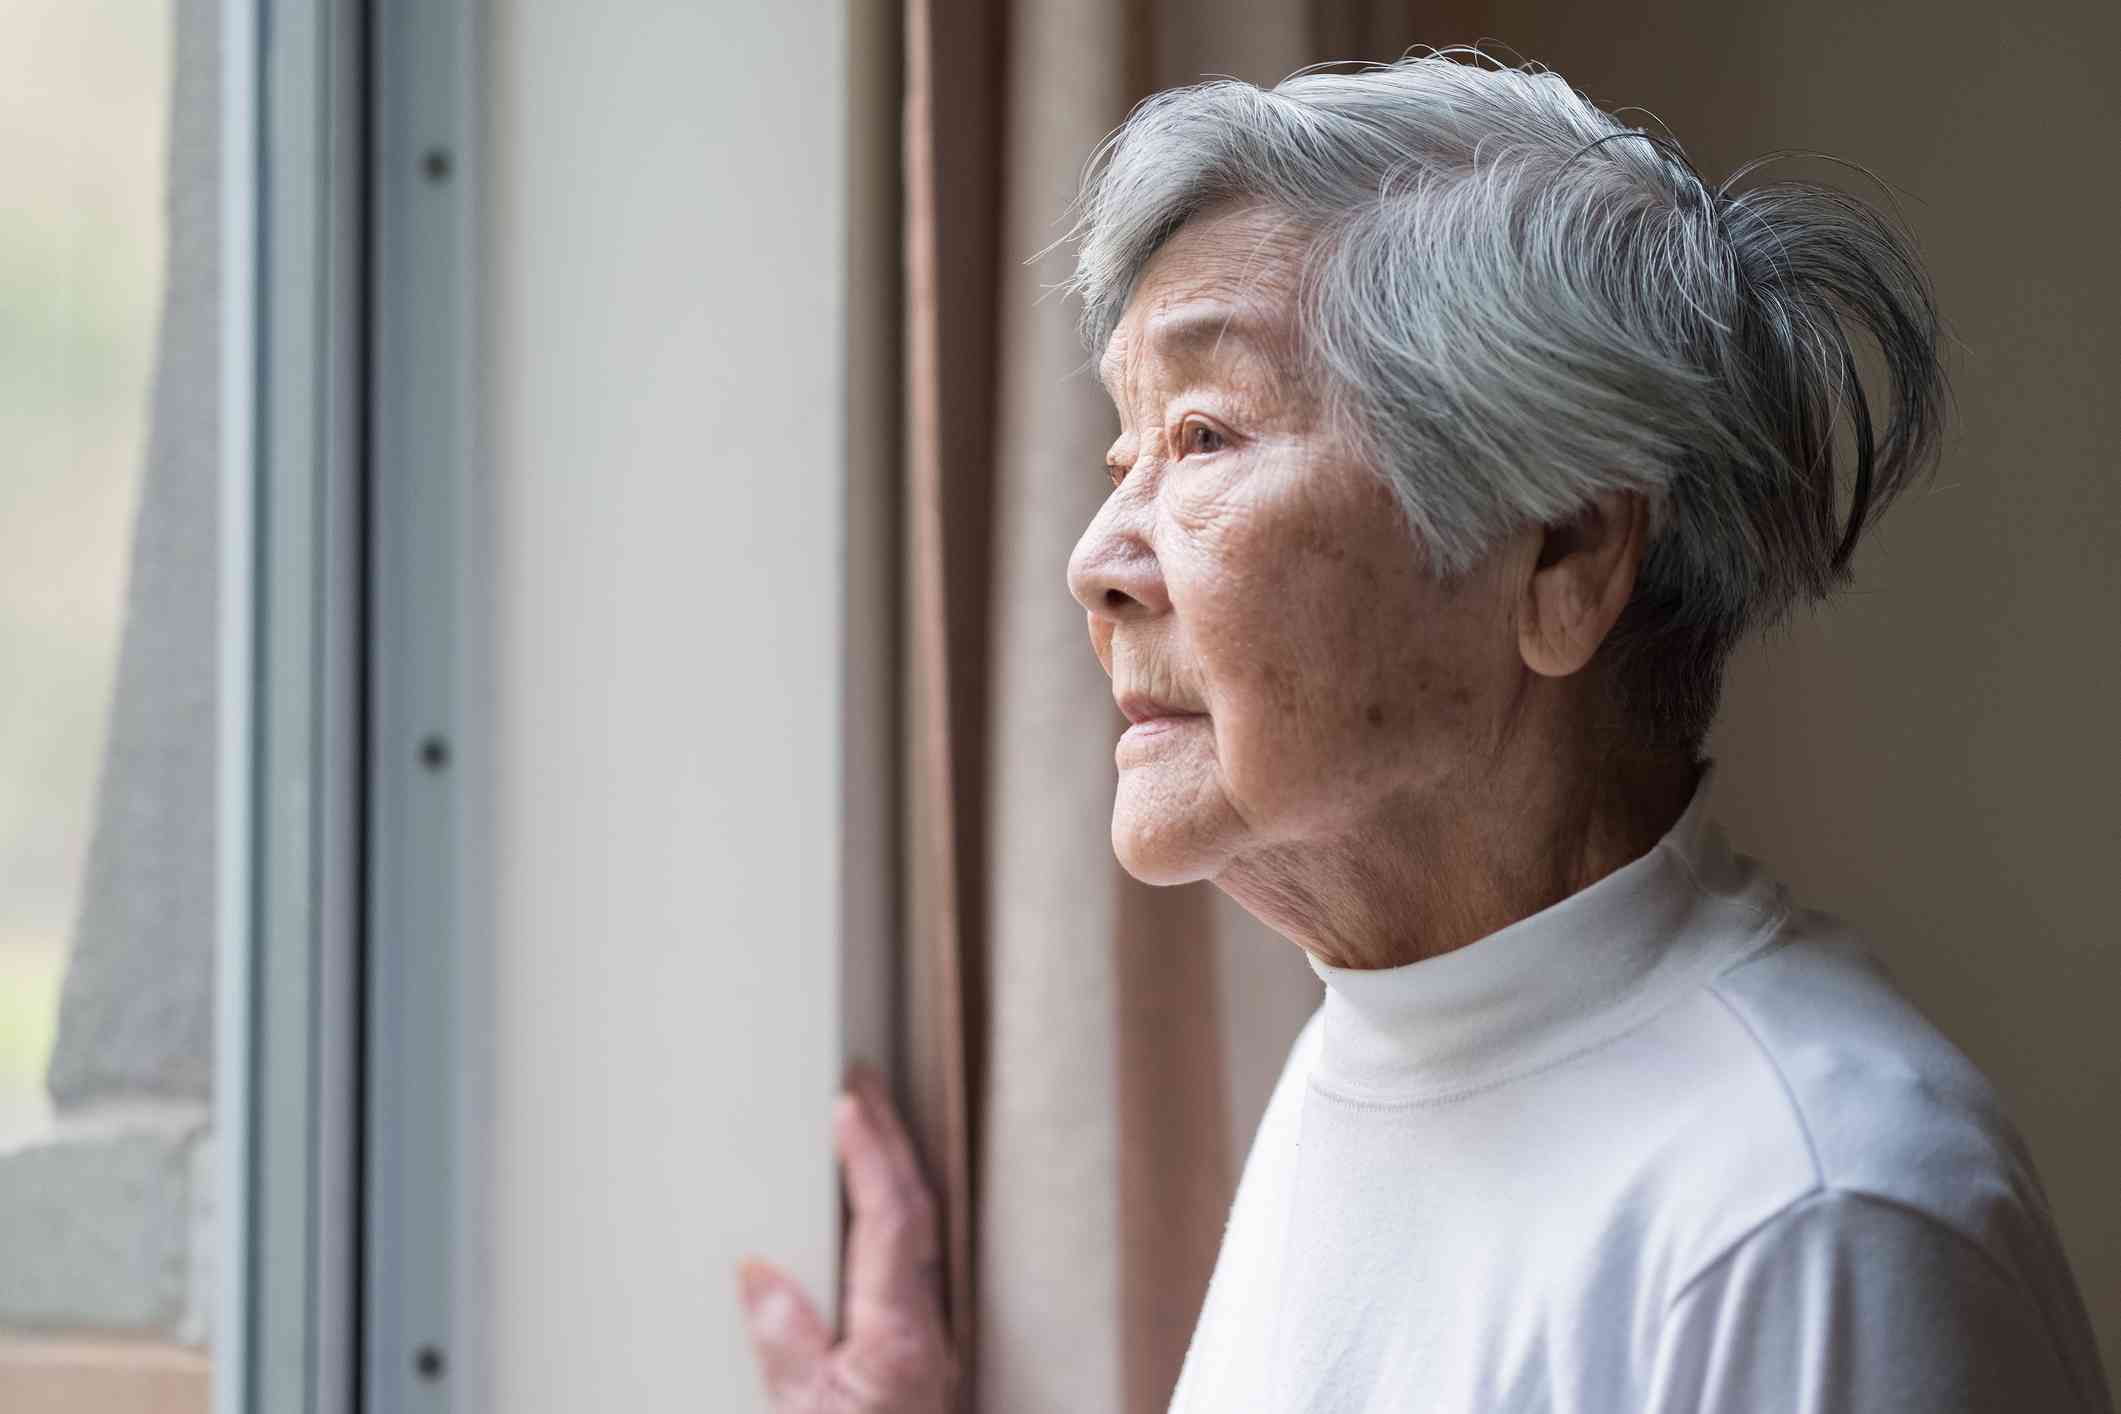 An elderly woman in a white shirt stands near a window in her home and gazes out sadly.